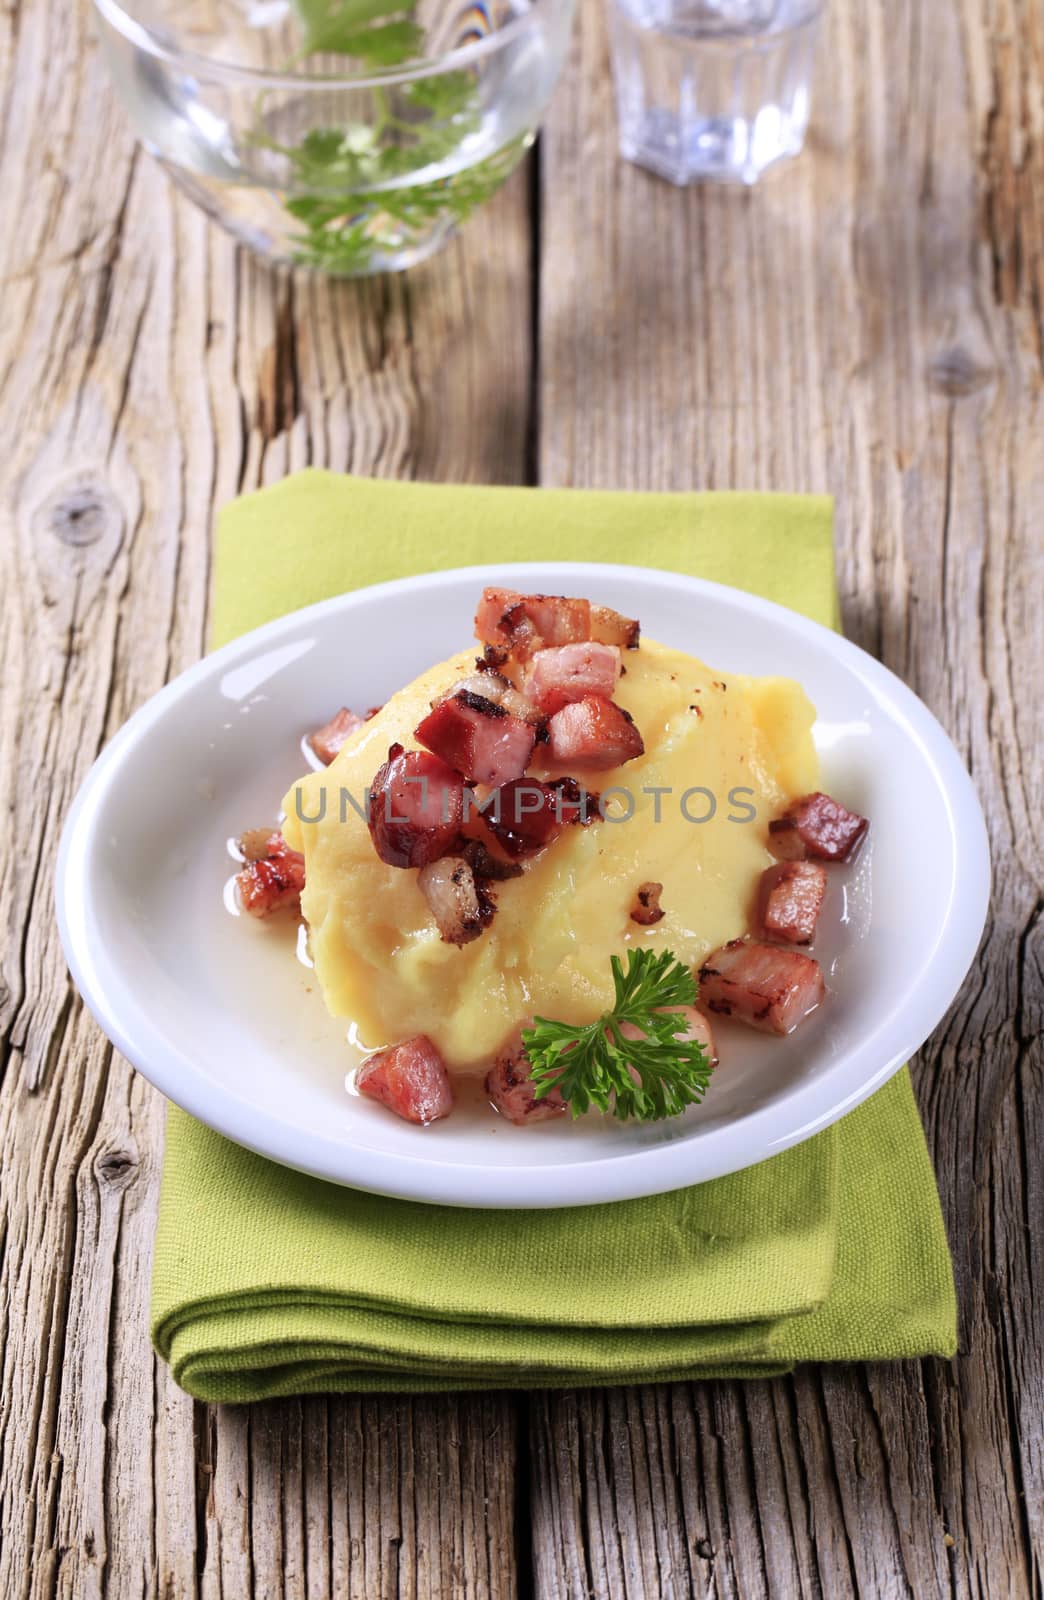 Dish of mashed potato and diced smoked pork on wooden background